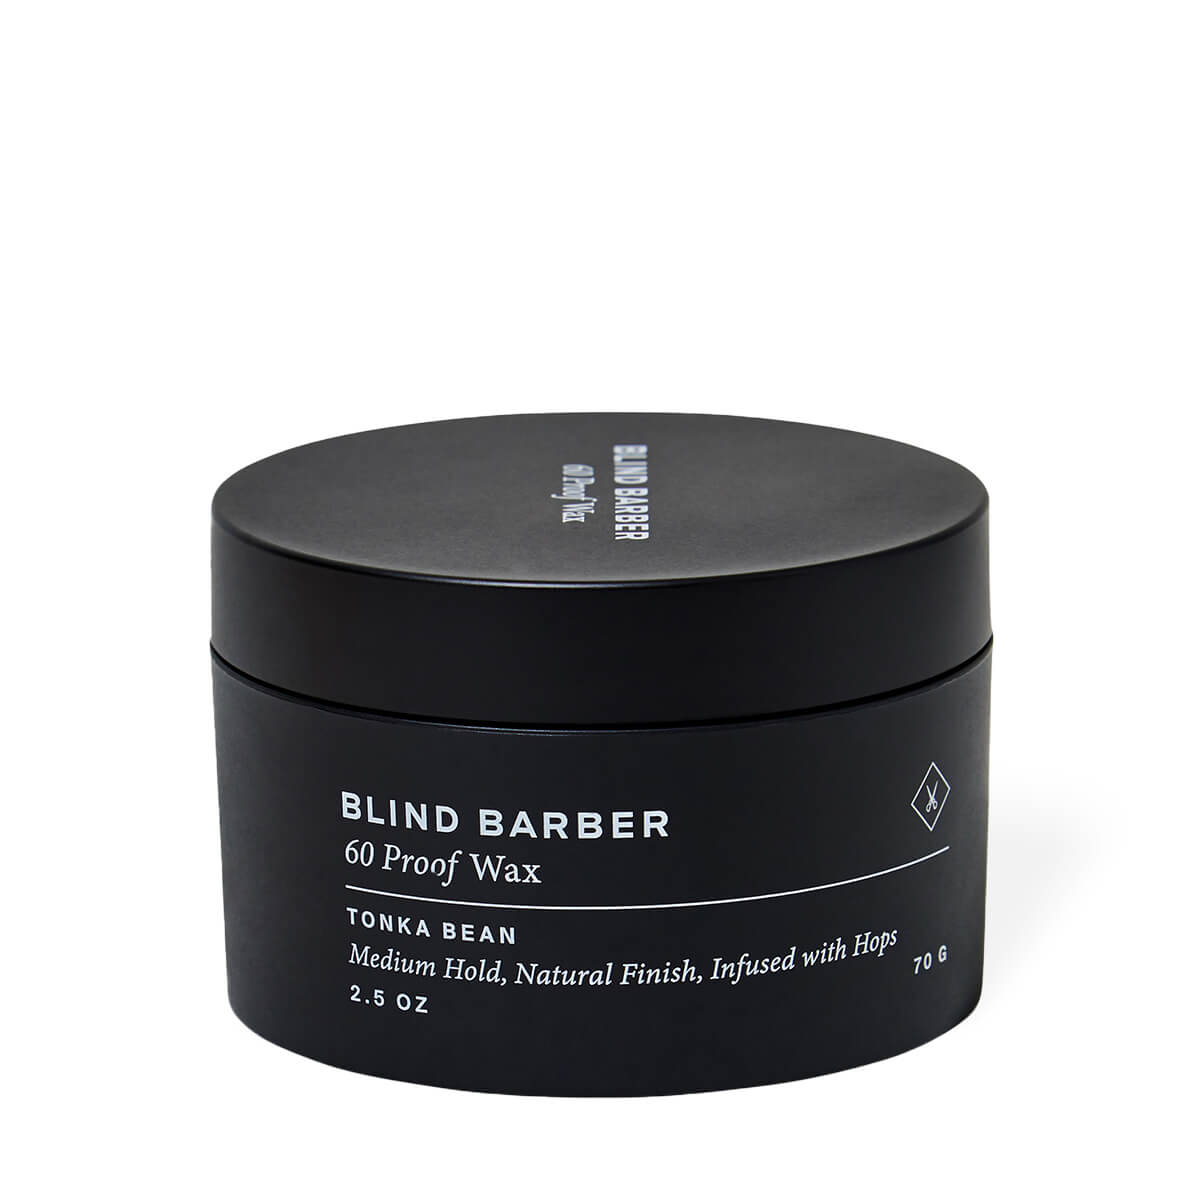 60 Proof Wax by Blind Barber